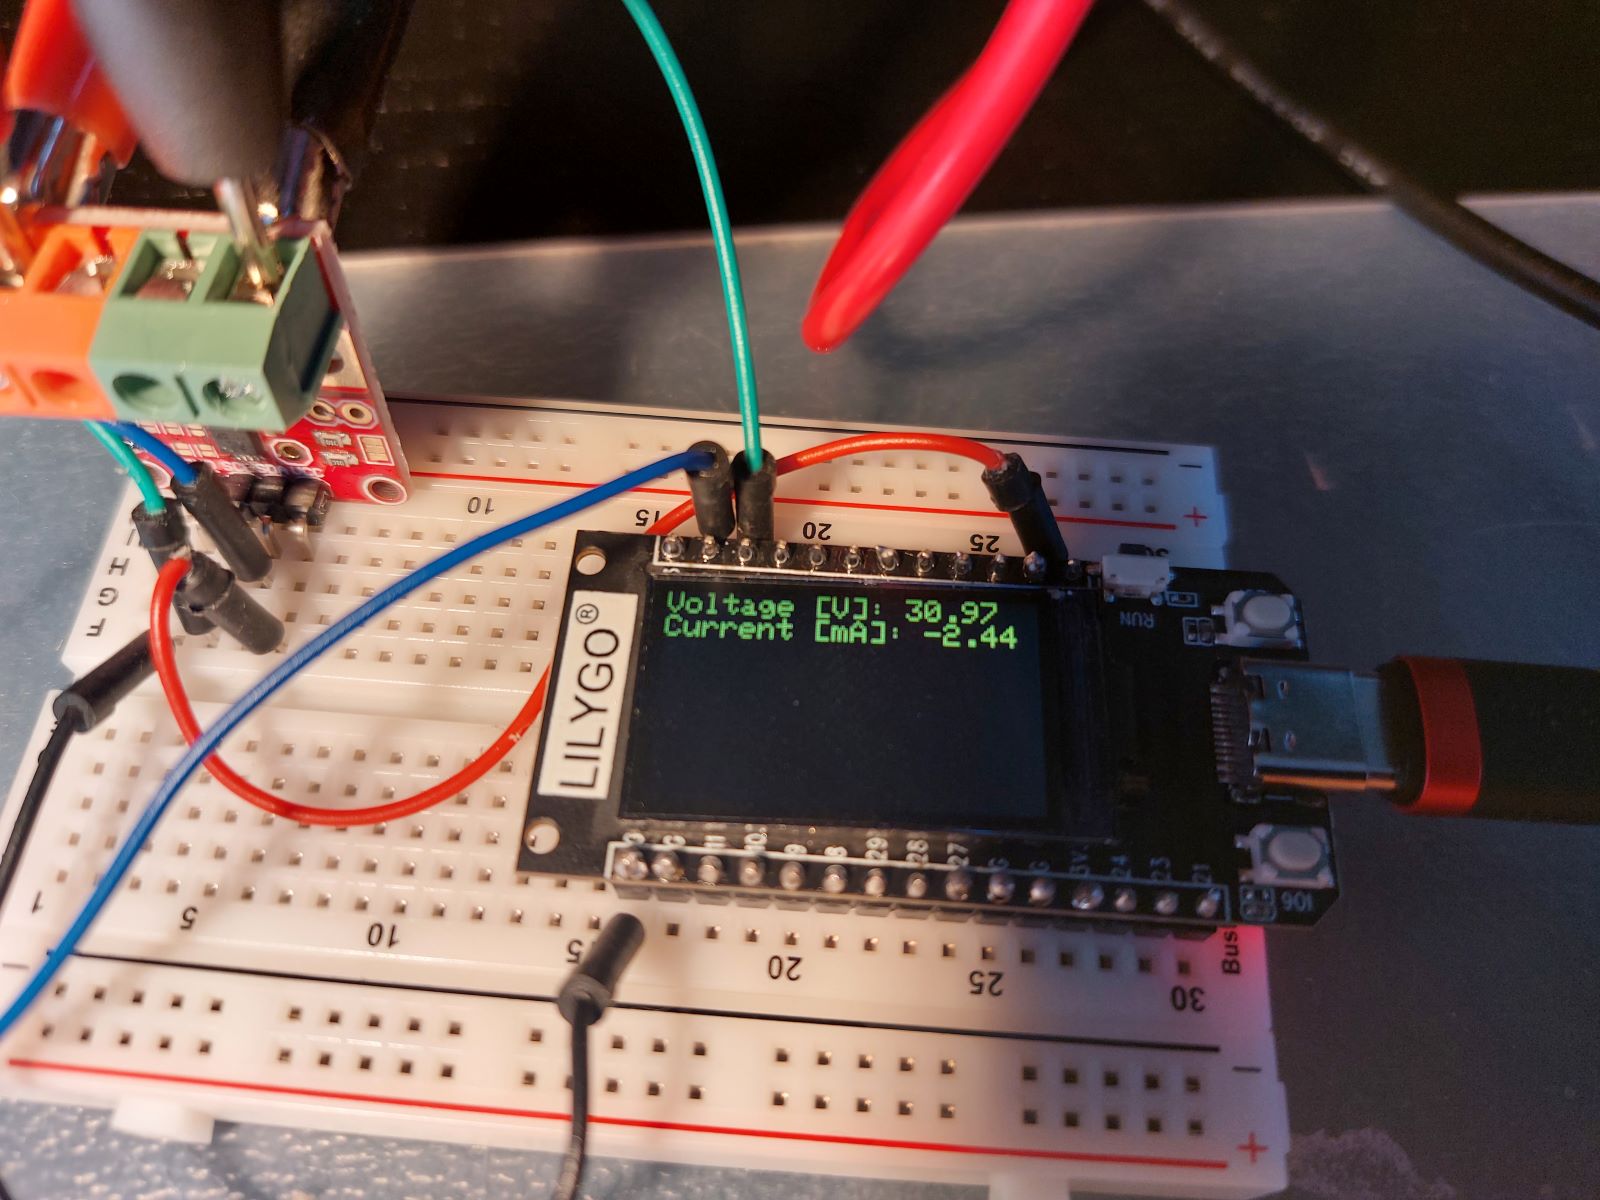 Acurate (high) voltage measurement on a RP2040 with display